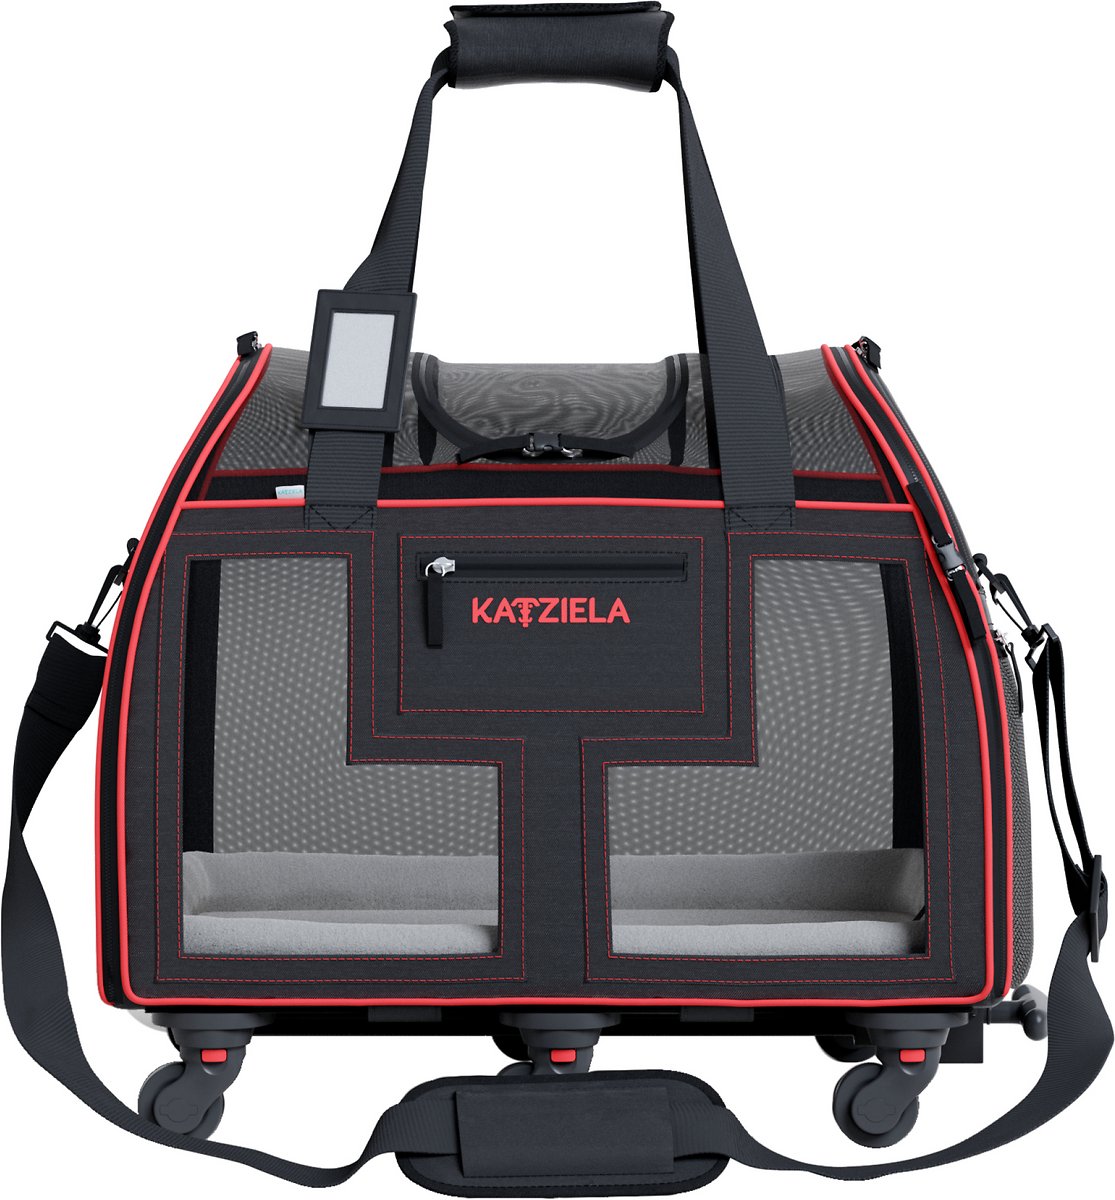 https://bigbigmart.com/wp-content/uploads/2022/07/Katziela-Rolling-Pet-Carrier-Airline-Approved-Pet-Carrier-with-Wheels-Luxury-Lorry-Deluxe-TSA-Approved-Cat-Carrier-with-Wheels-Small-Airline-Approved-Dog-Carrier-Trolley-Plane-Carry-On-Bag1-1.jpg